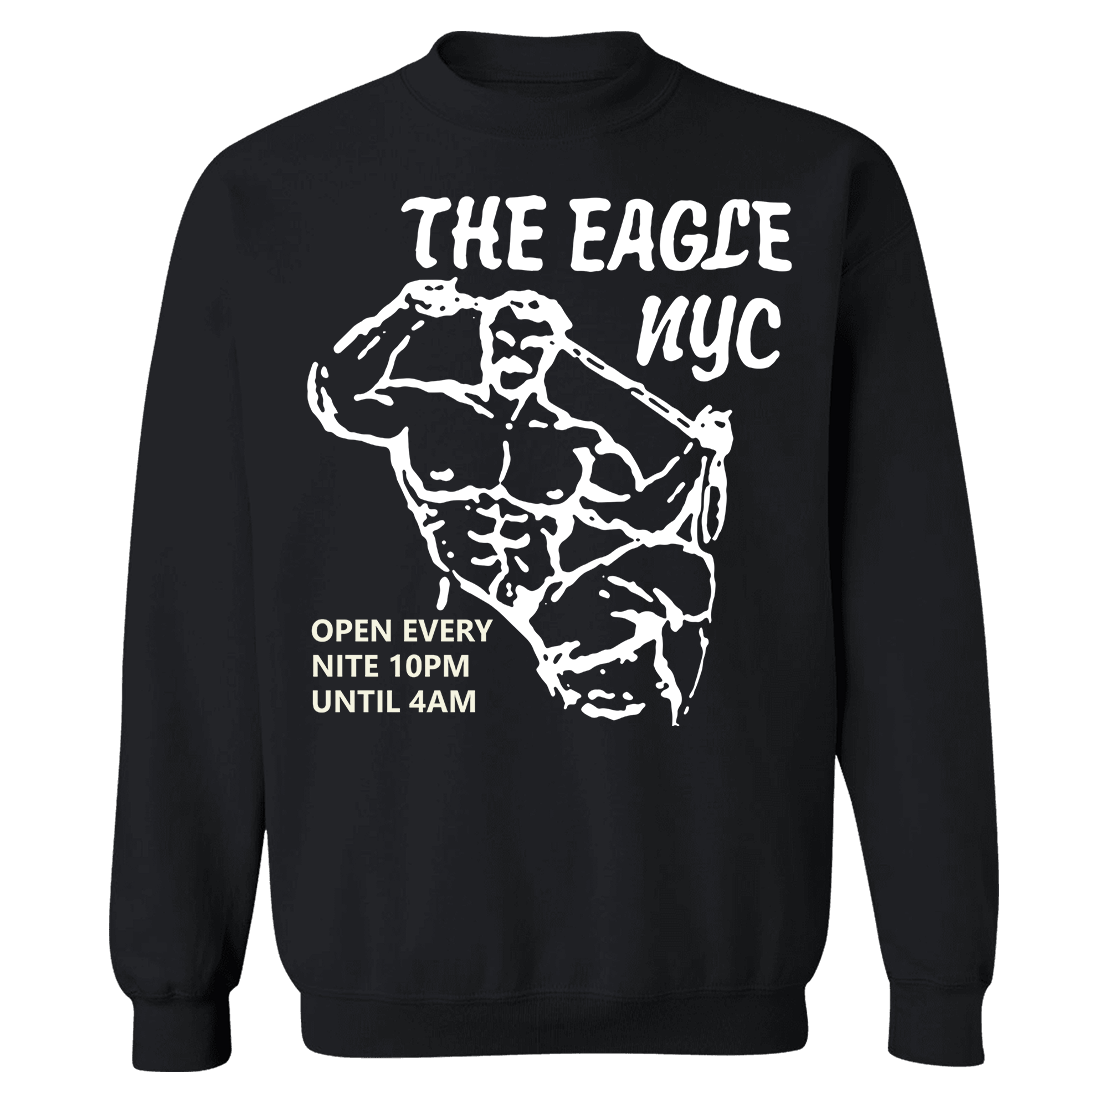 The Eagle NYC Open Every Nite 10pm Until 4AM Sweatshirt